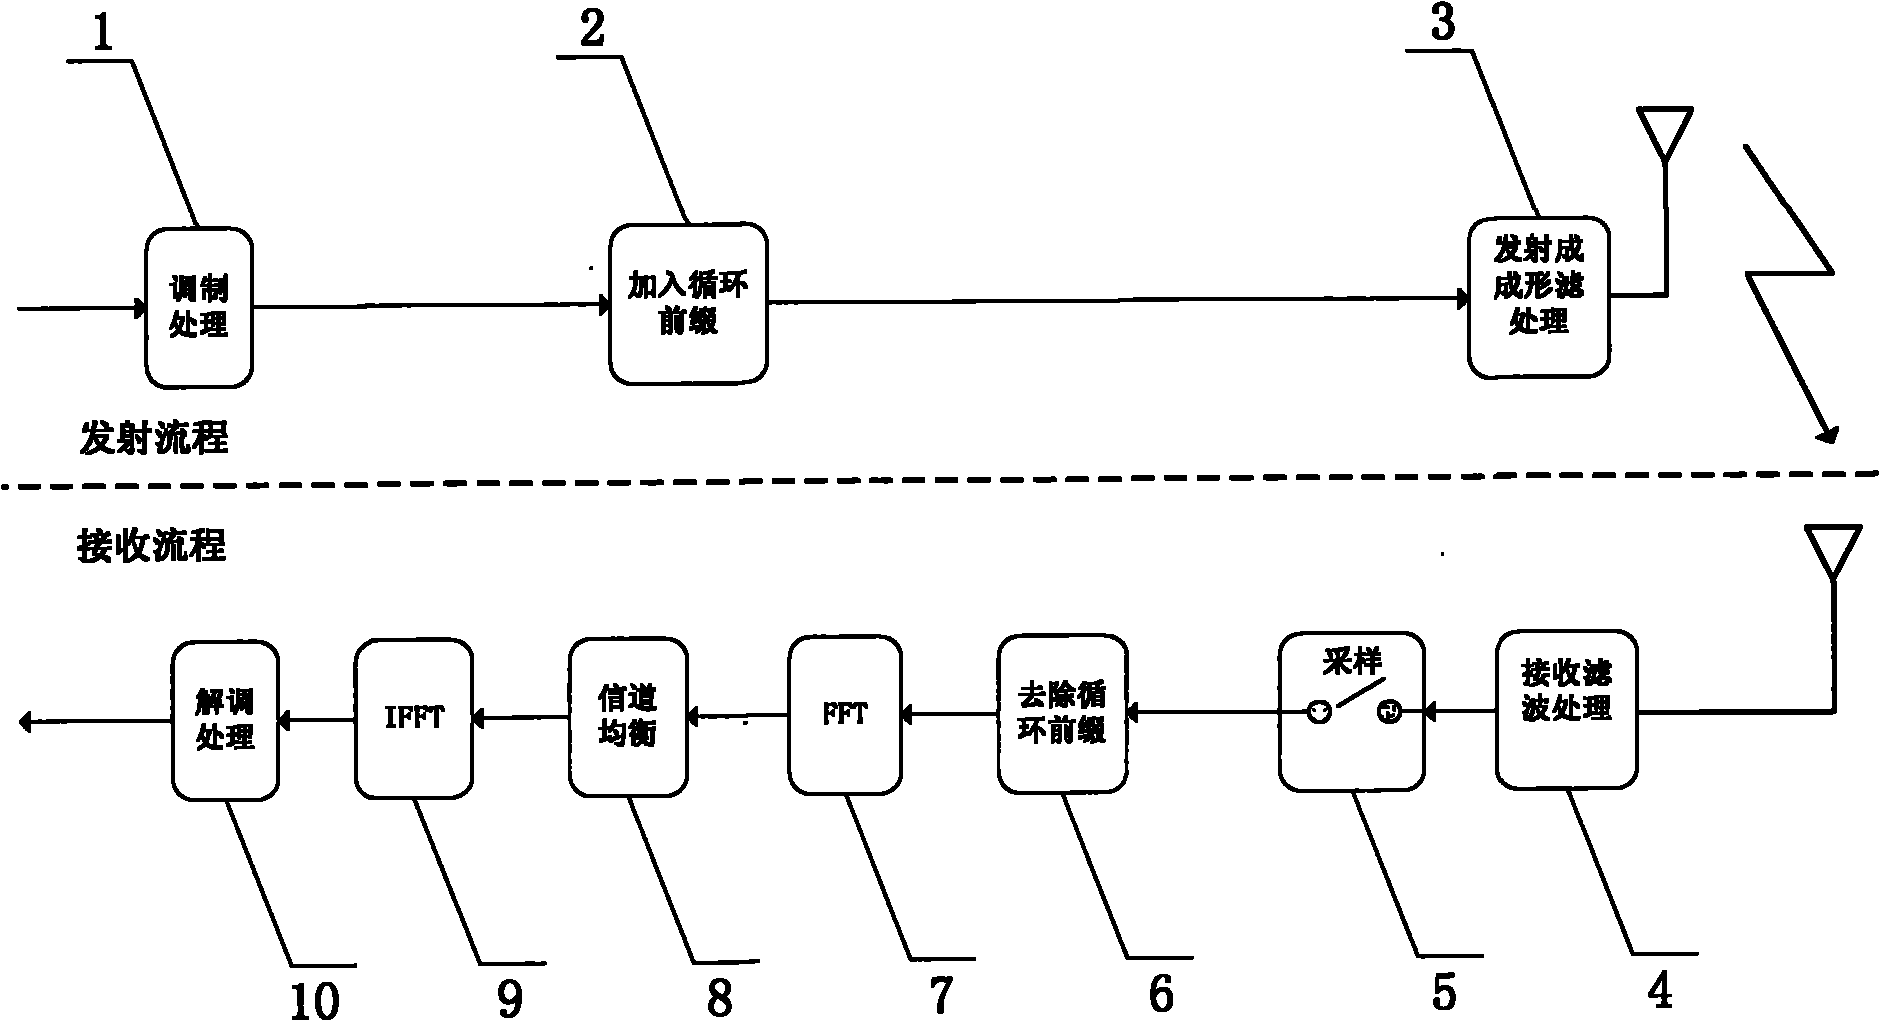 Oversampling receiving method of single-carrier wave frequency domain equalization technology